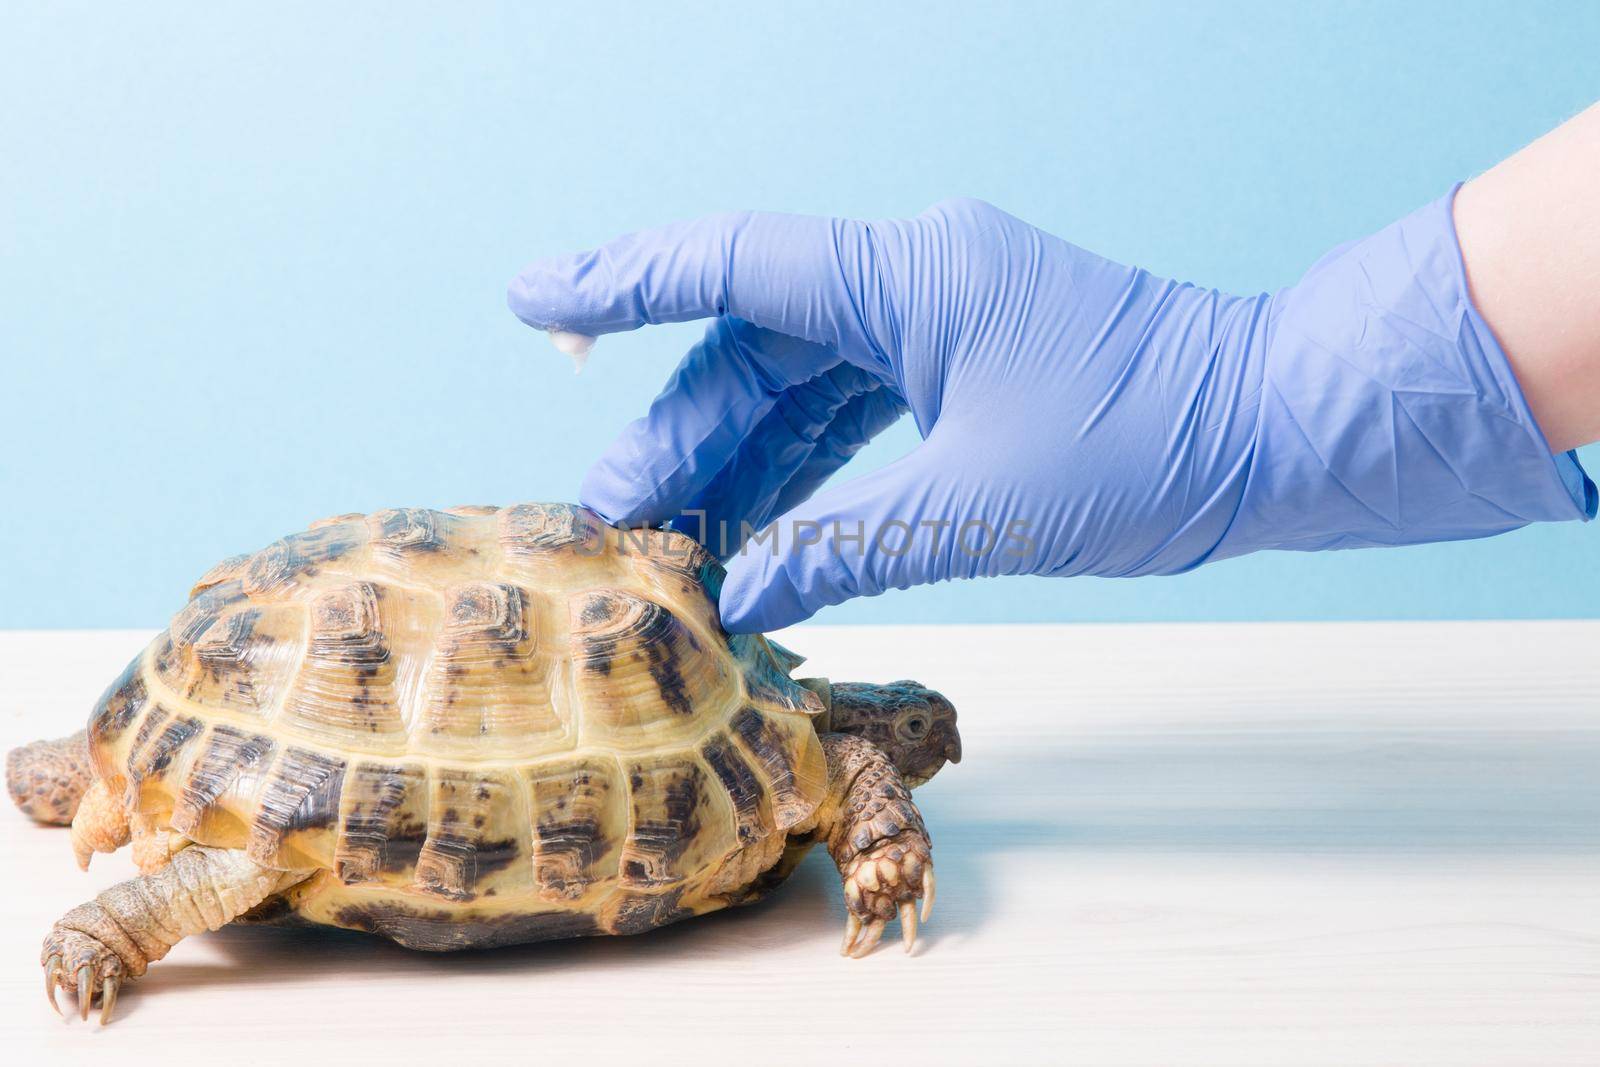 the hand of the herpetologist's veterinarian ointment covers the shell of the turtle, the hand in a rubber glove with a drop of antifungal ointment on the finger, treatment of turtles